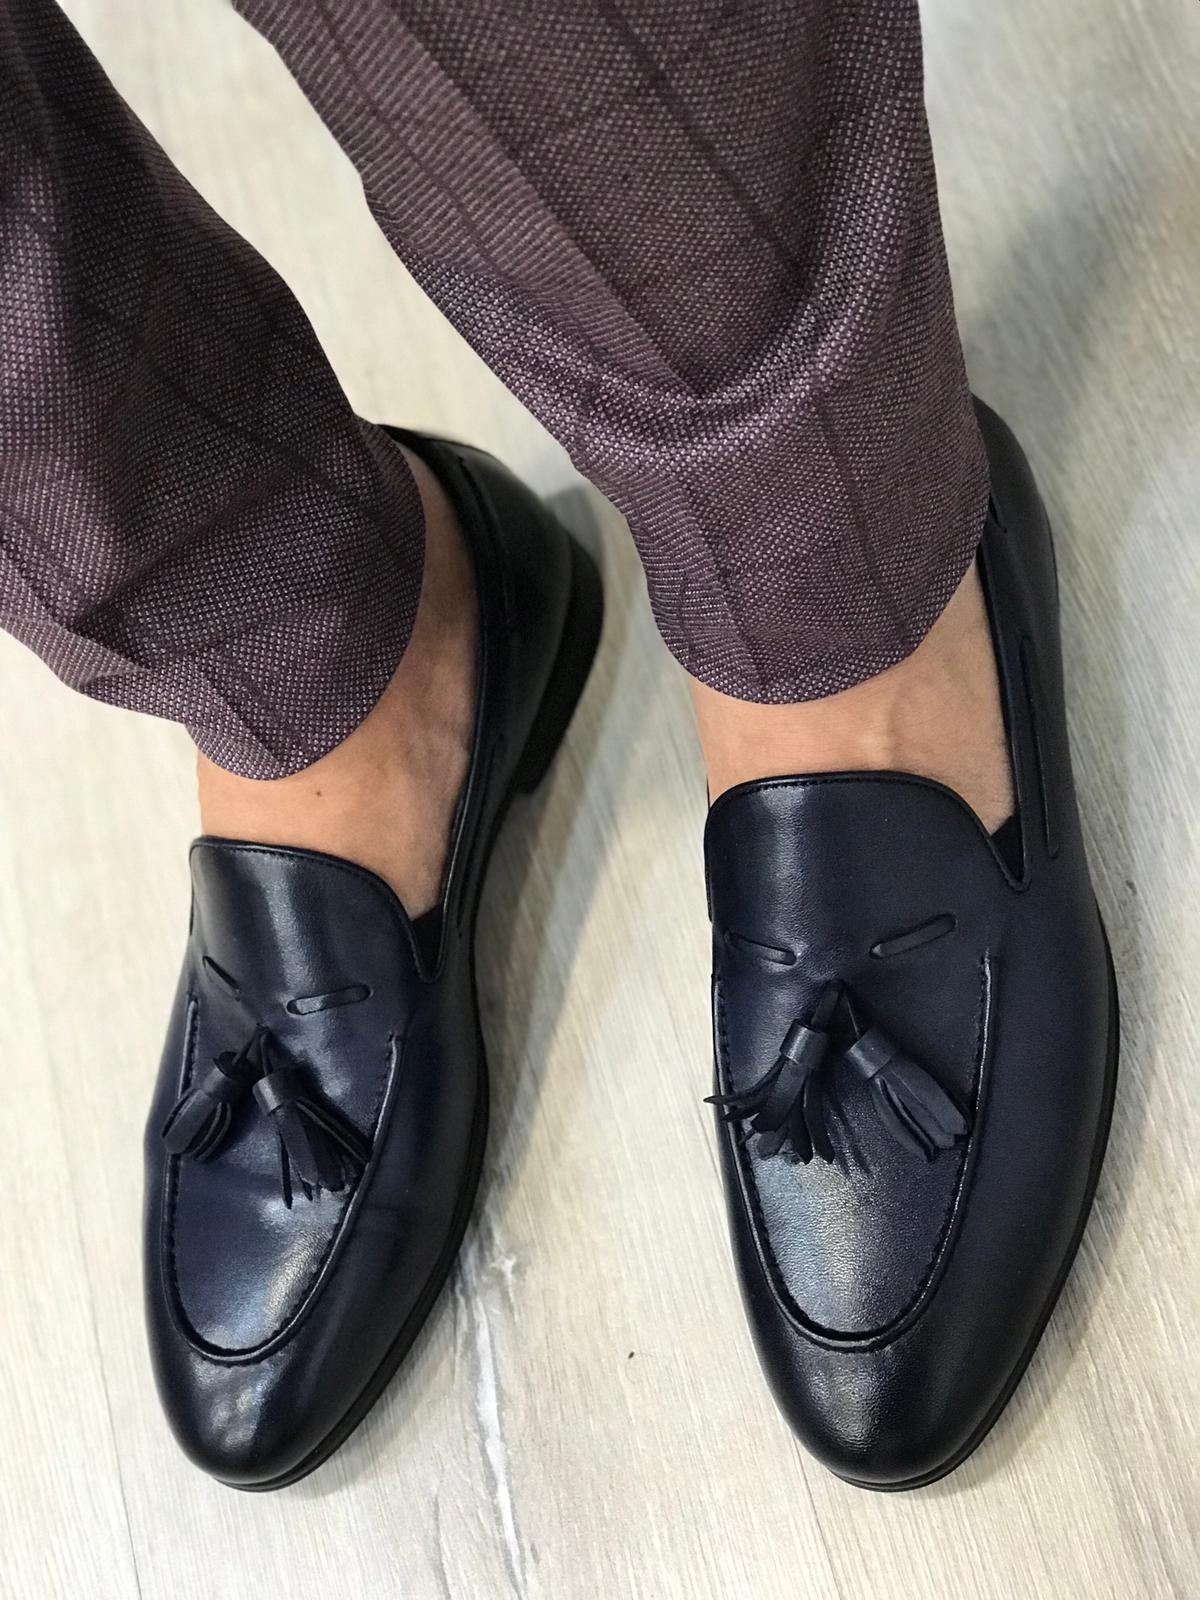 Buy Blue Tassel Loafer by Gentwith.com with Free Shipping